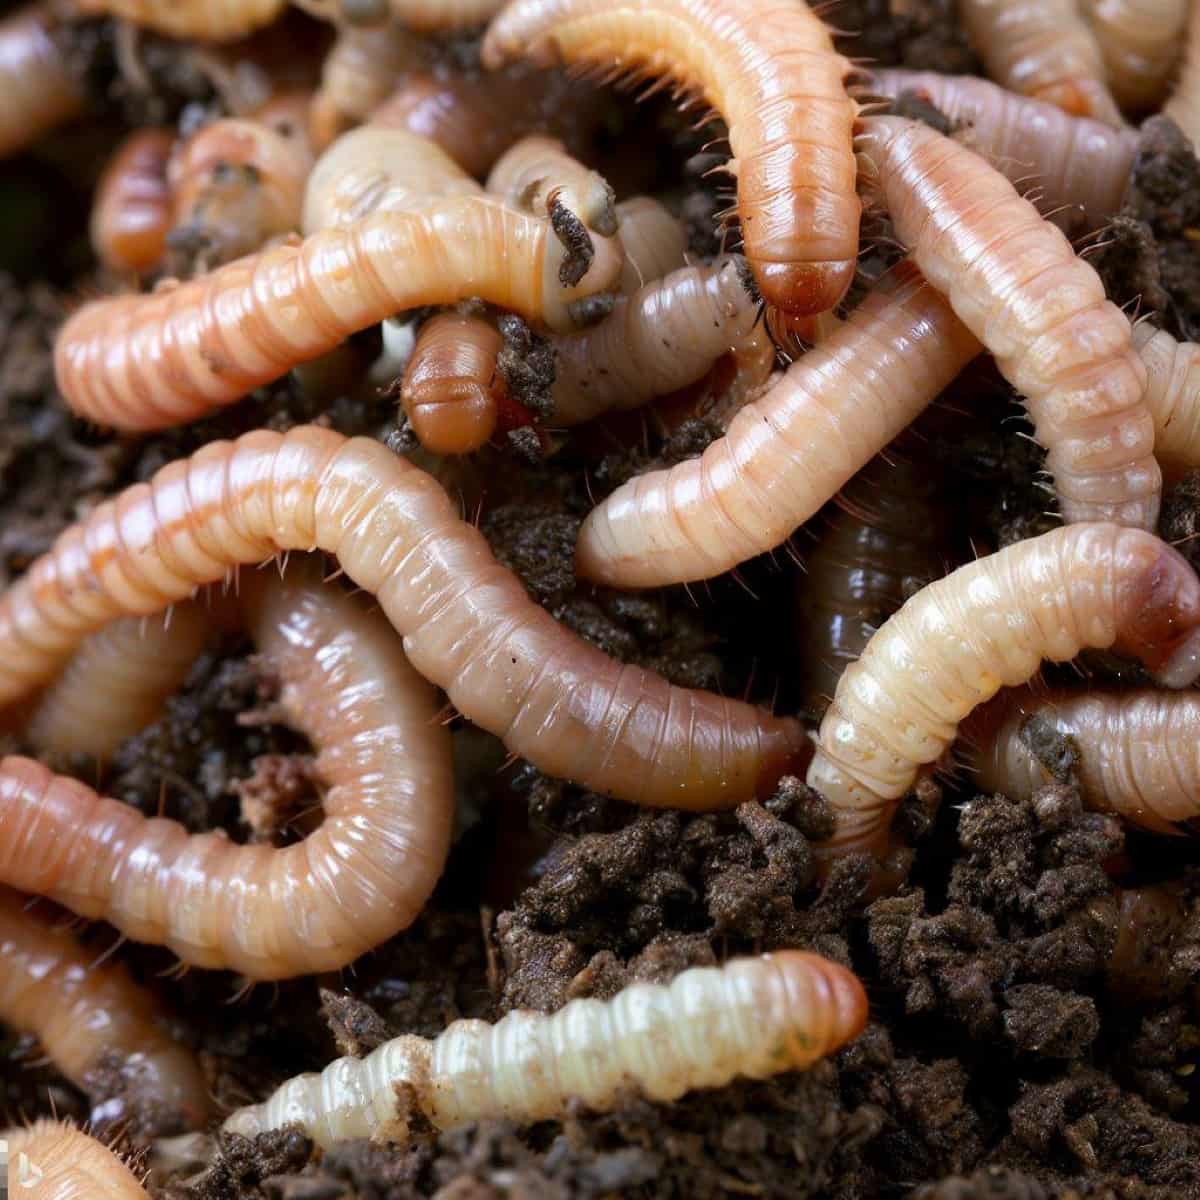 How to Get Rid of Maggots in Compost Bin